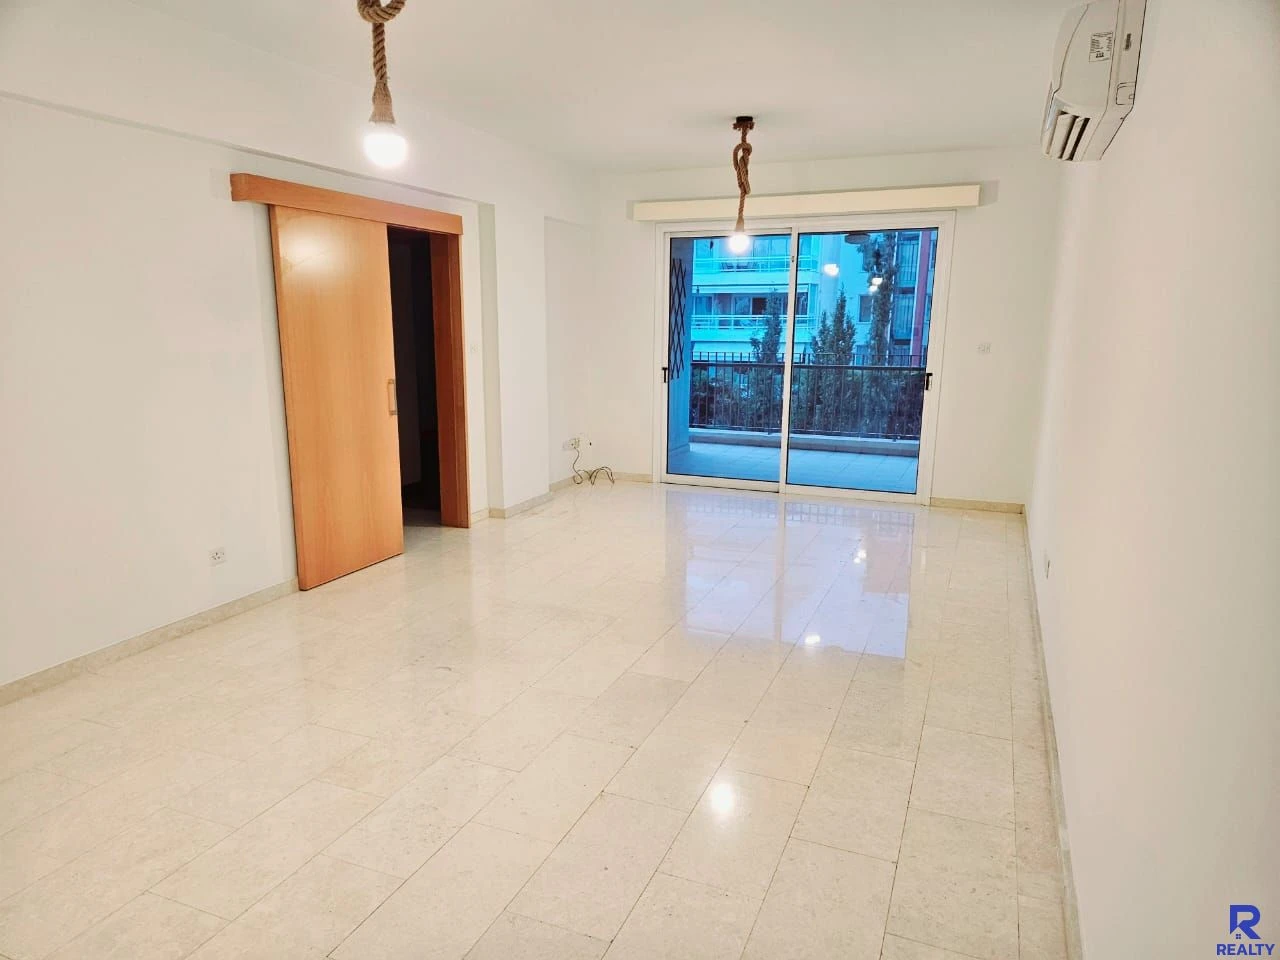 2-bedroom apartment to sale, image 1